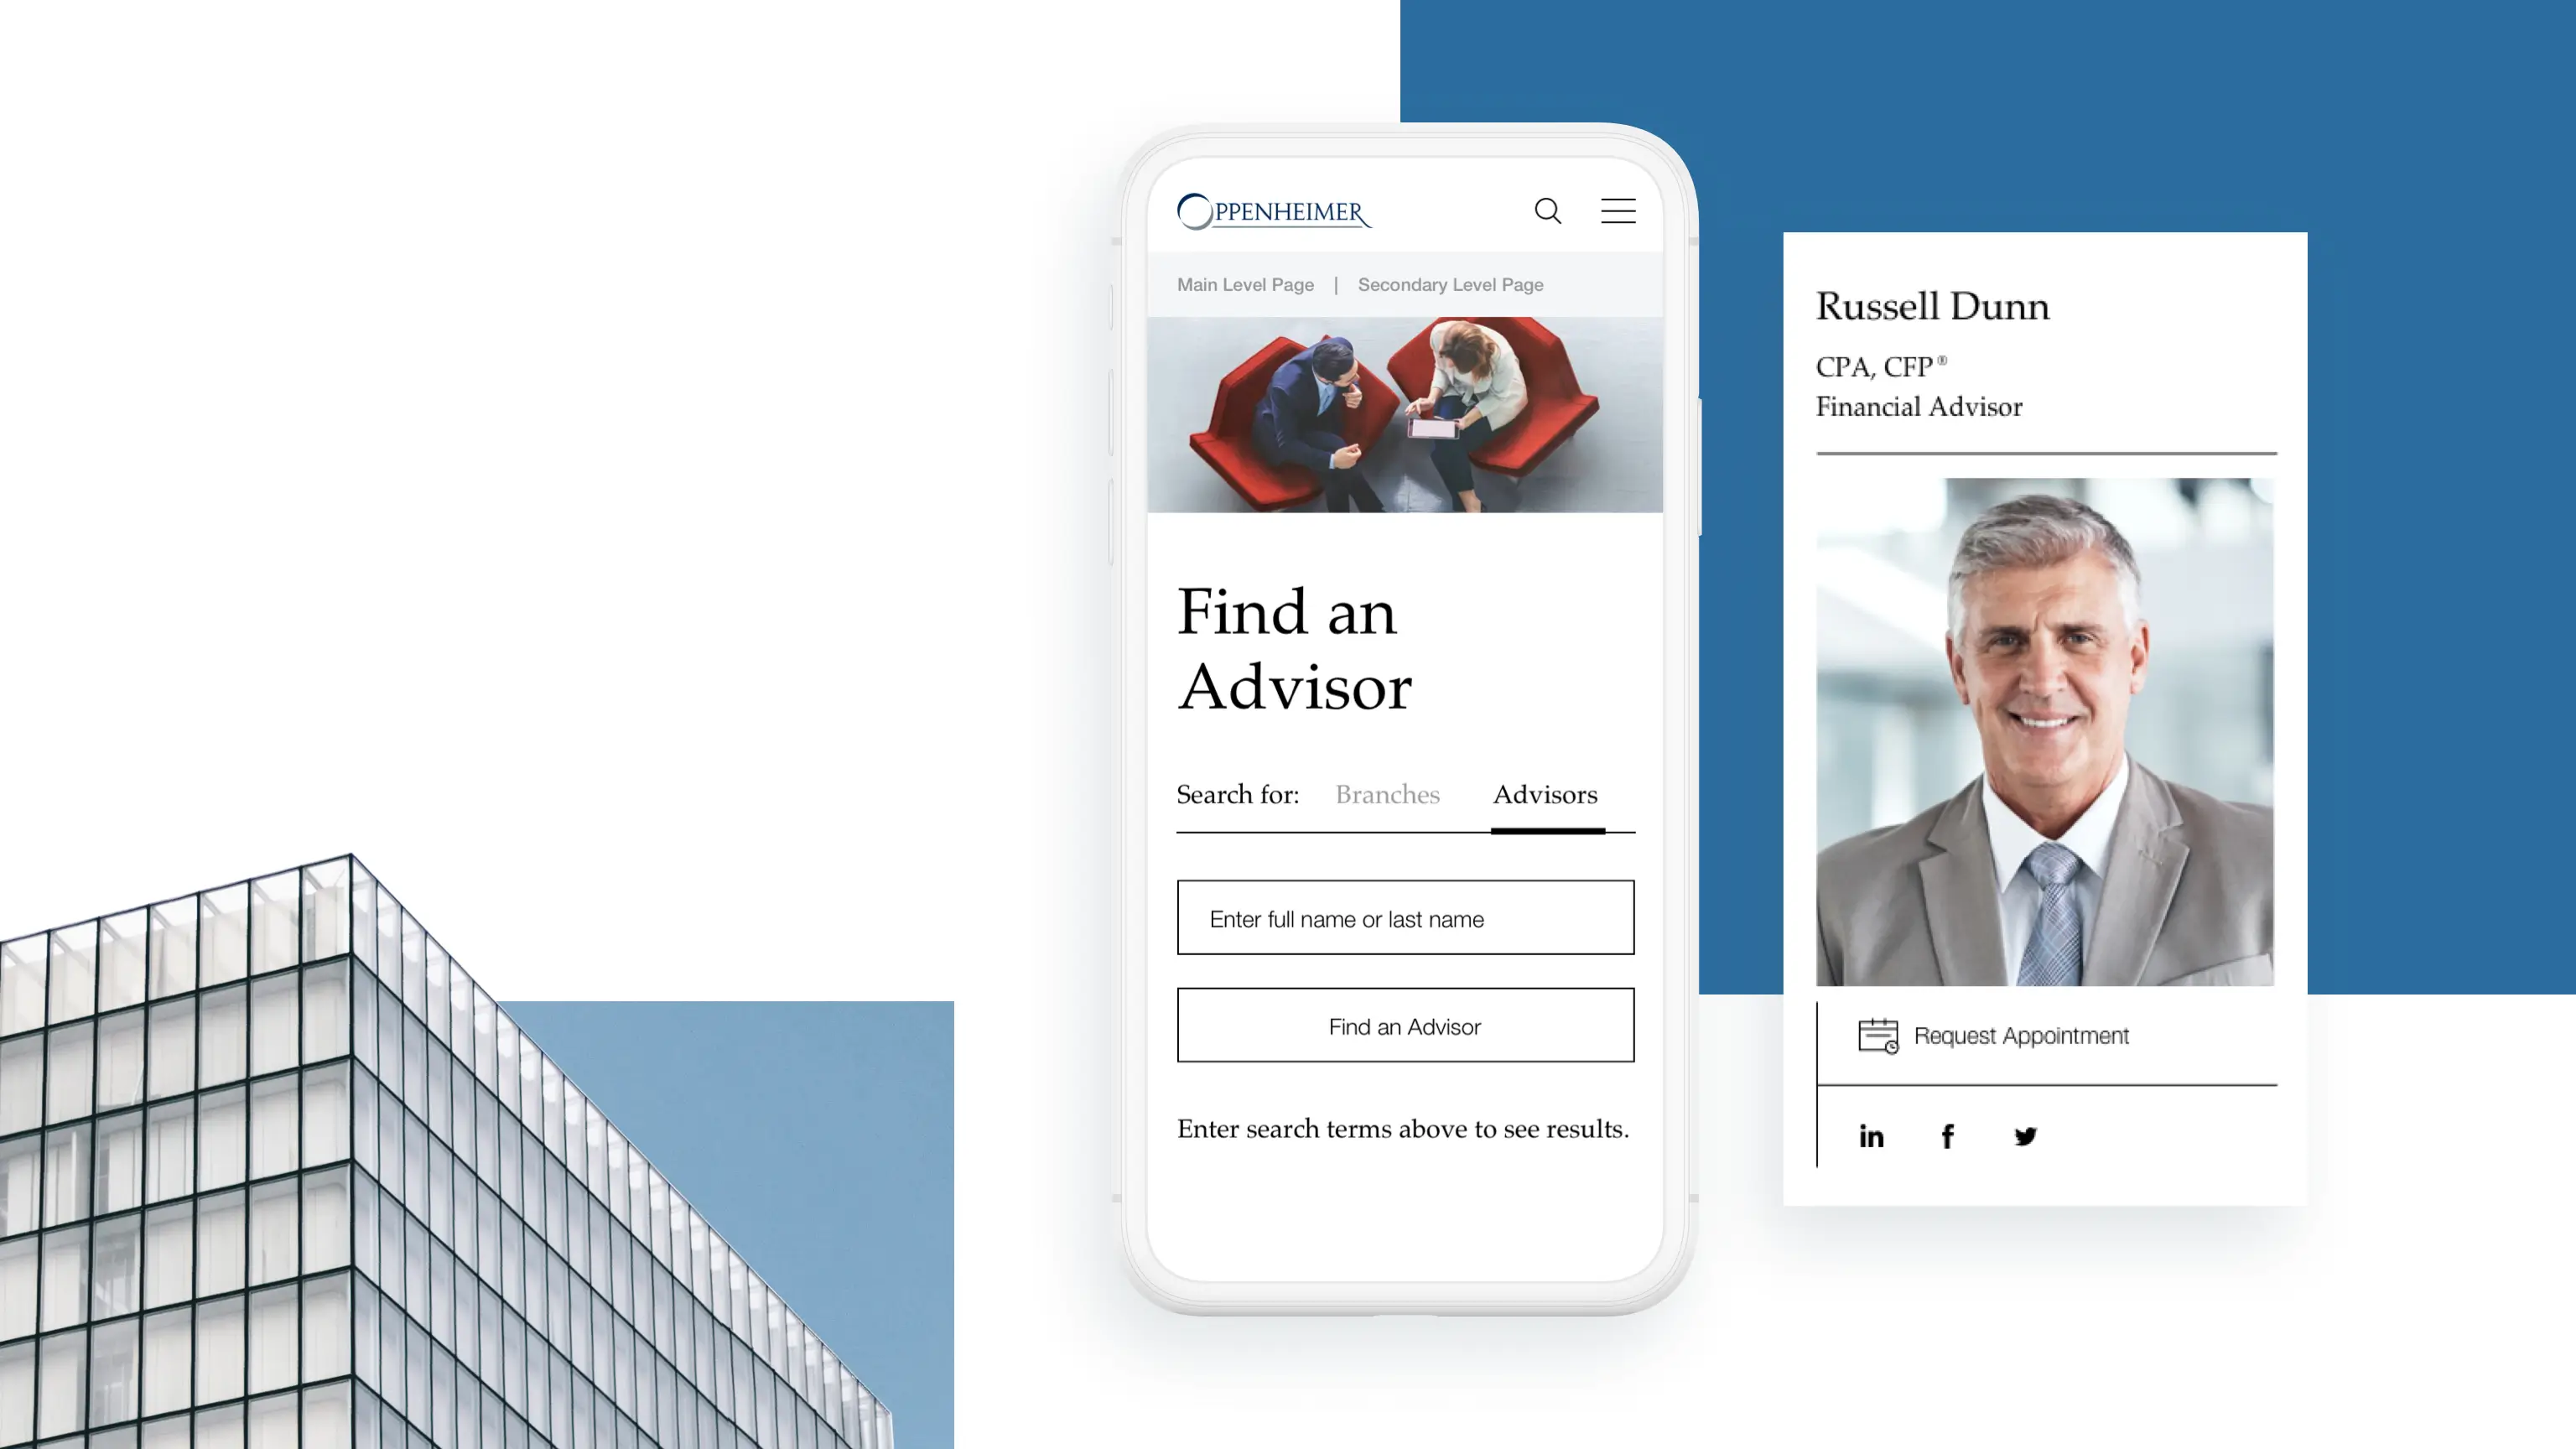 Oppenheimer's updated internal search functionality to find an advisor and request and appointment.